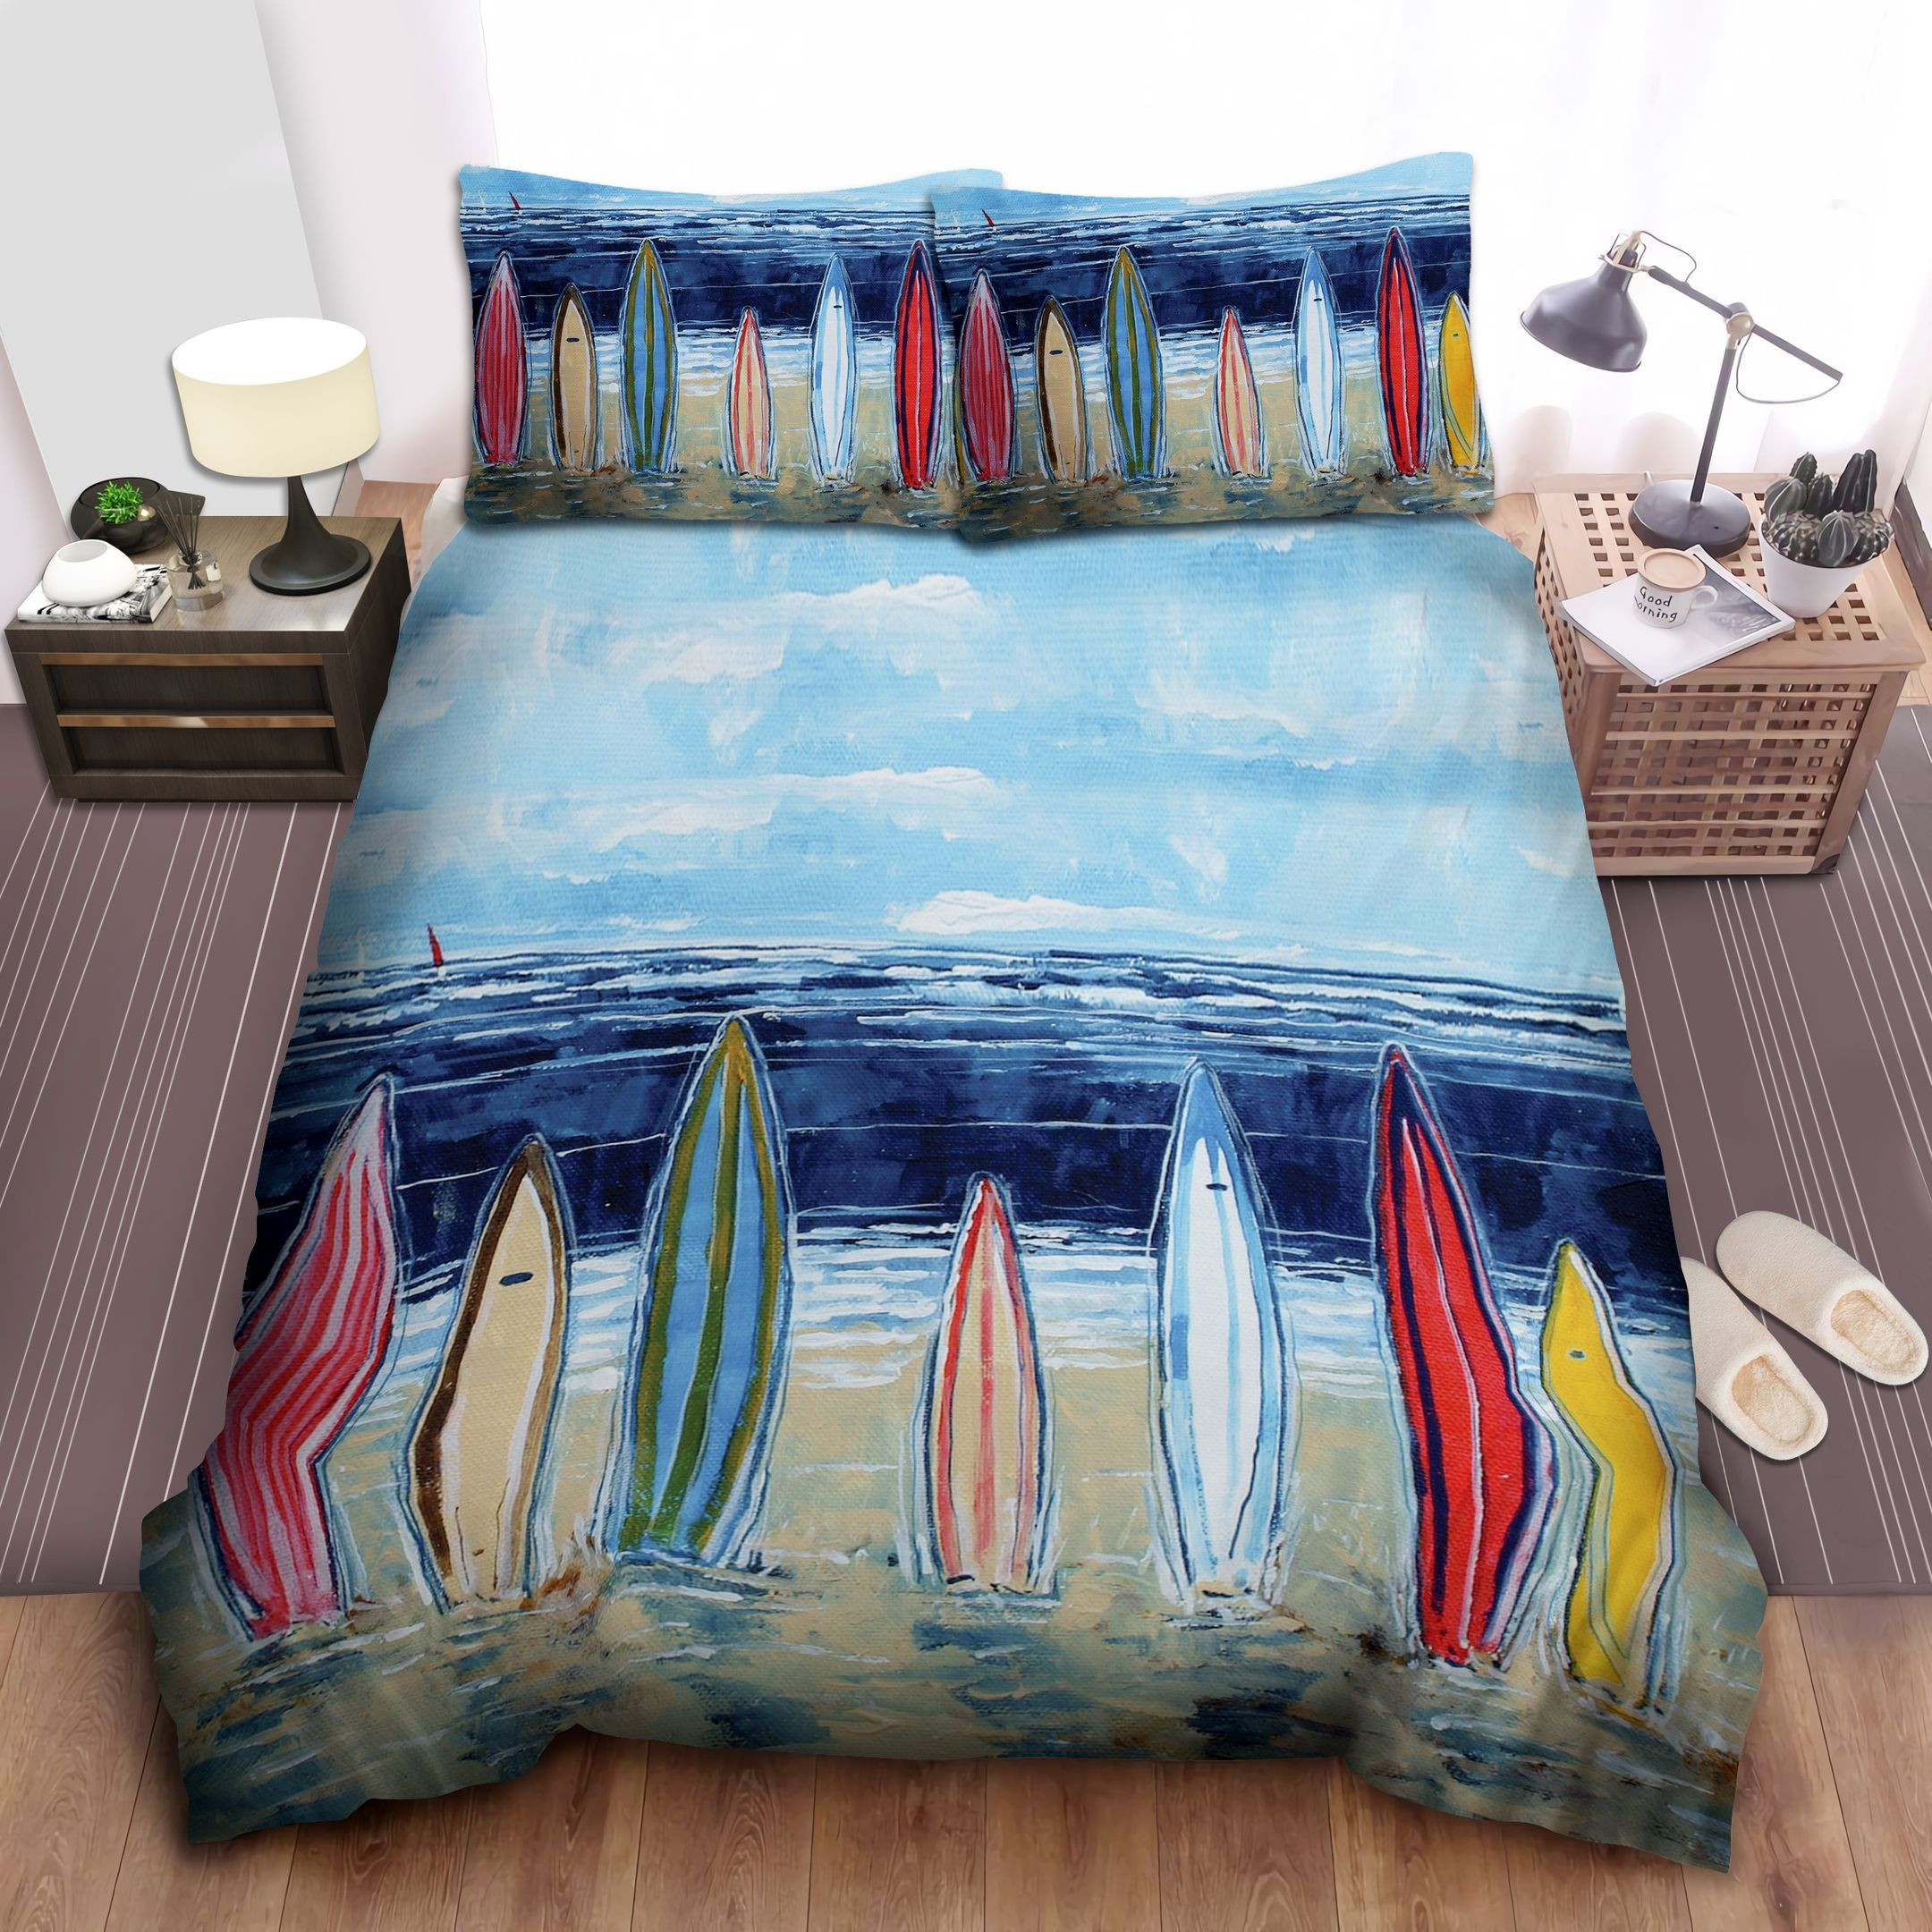 Surfboard On The Beach Bed Sheets Duvet Cover Bedding Sets. PLEASE NOTE ...